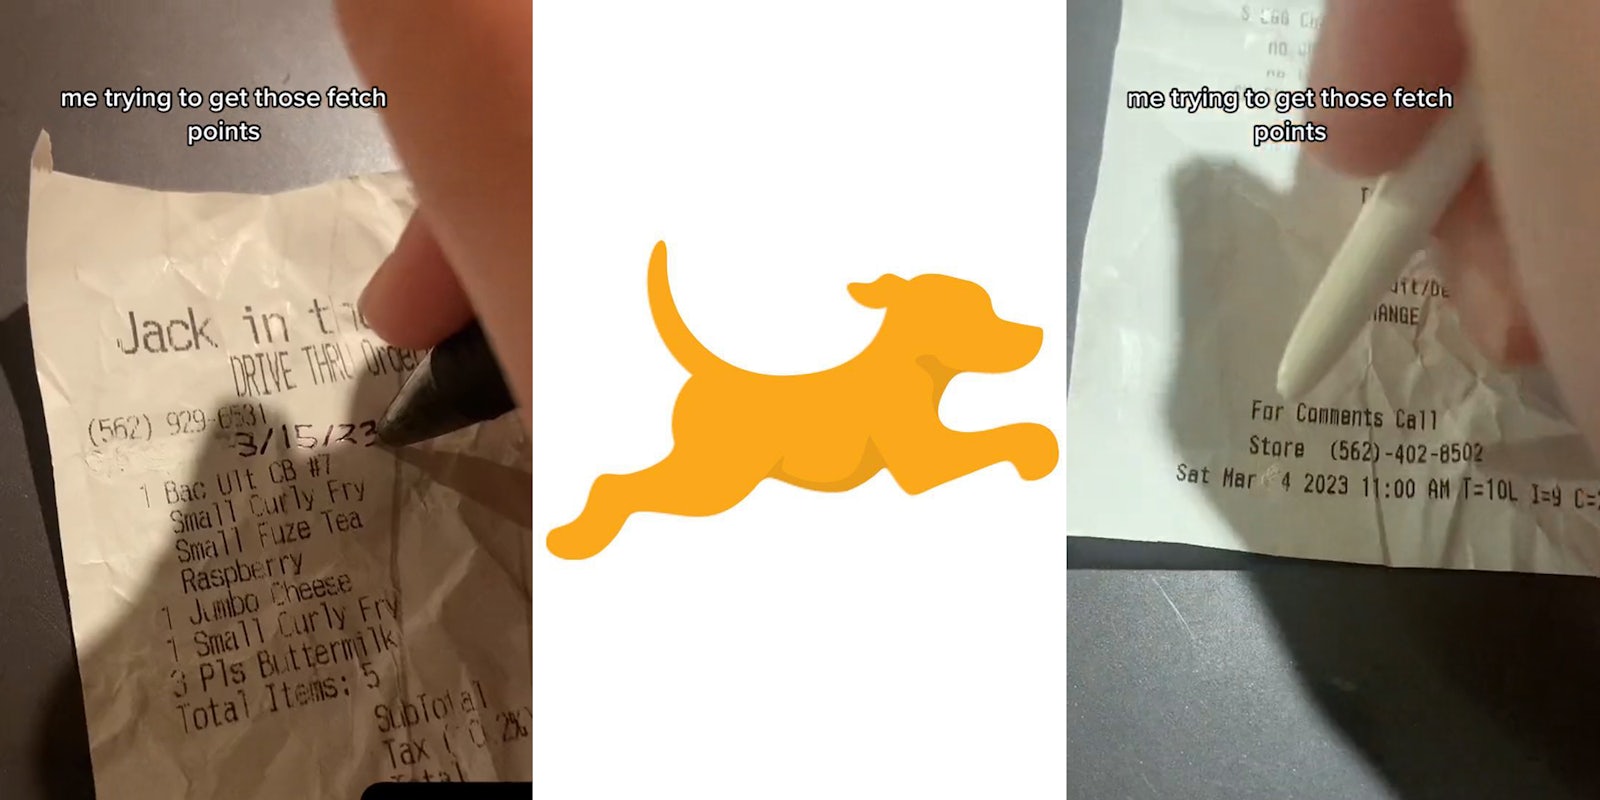 person using pen to change date on receipt with caption 'me trying to get those fetch points' (l) Fetch yellow dog logo on white background (c) person using white pen to change date on receipt with caption 'me trying to get those fetch points' (r)